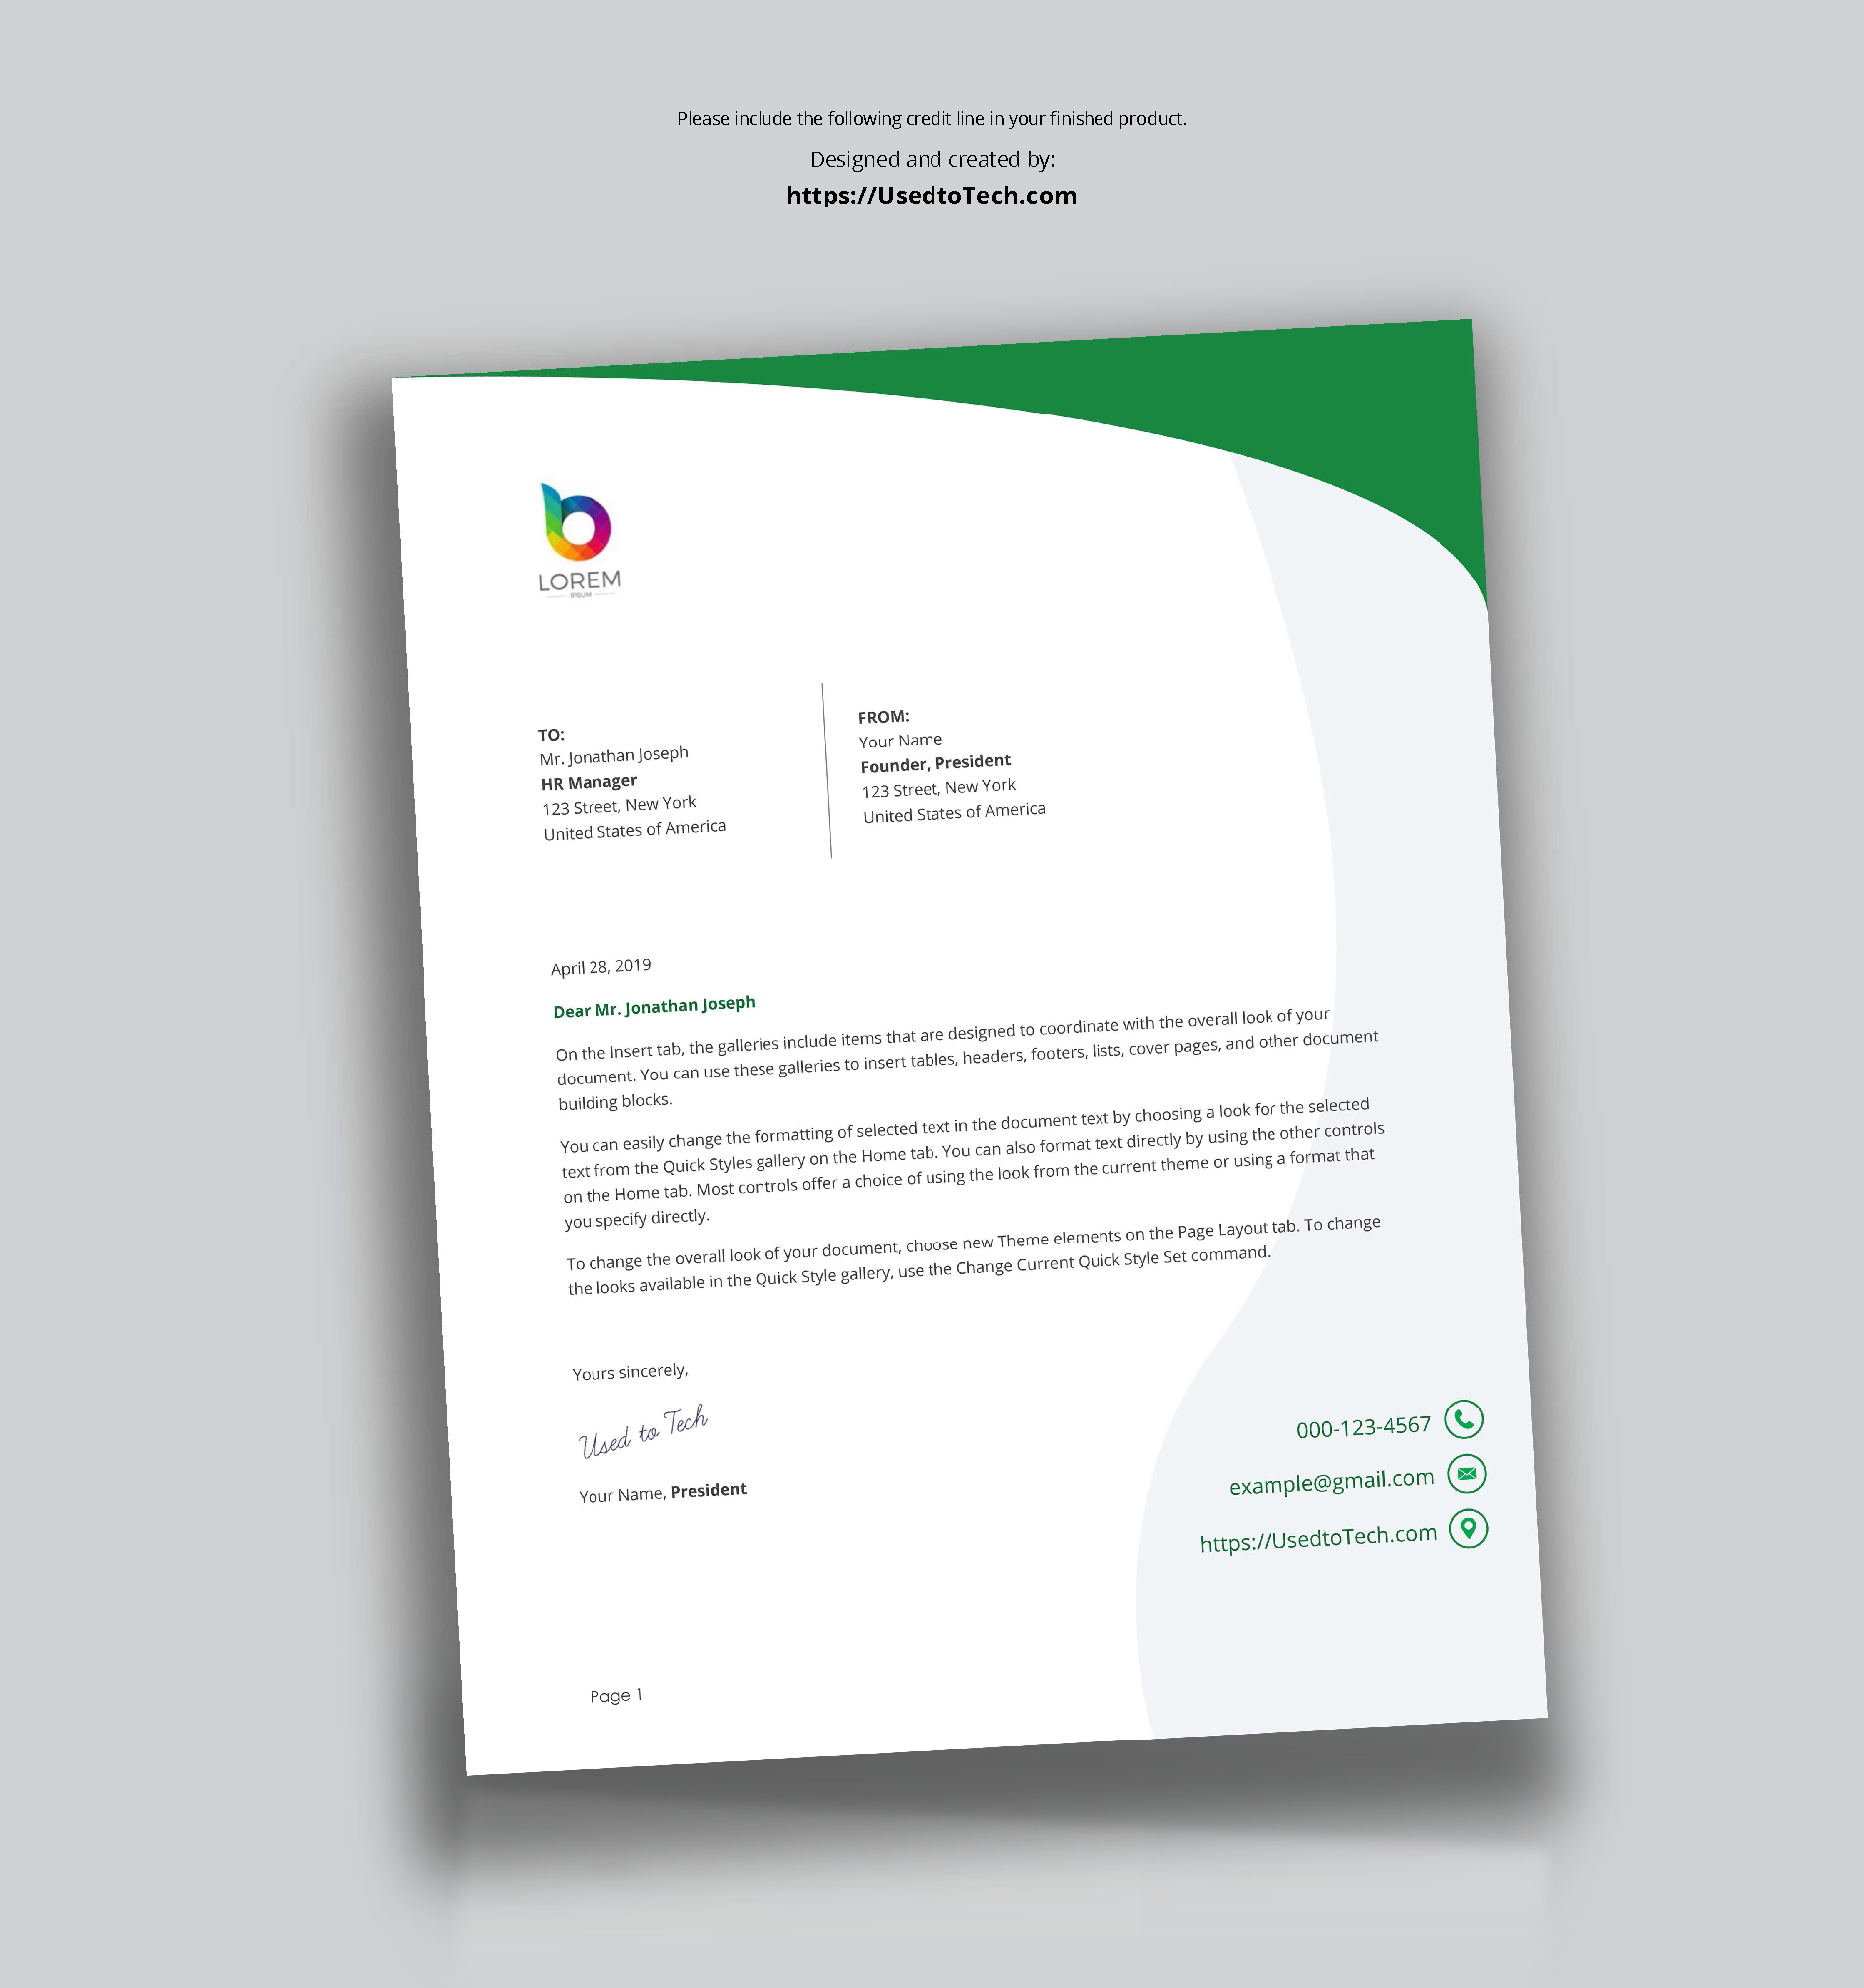 Perfect Letterhead Design In Word Free - Used To Tech With Regard To Free Letterhead Templates For Microsoft Word